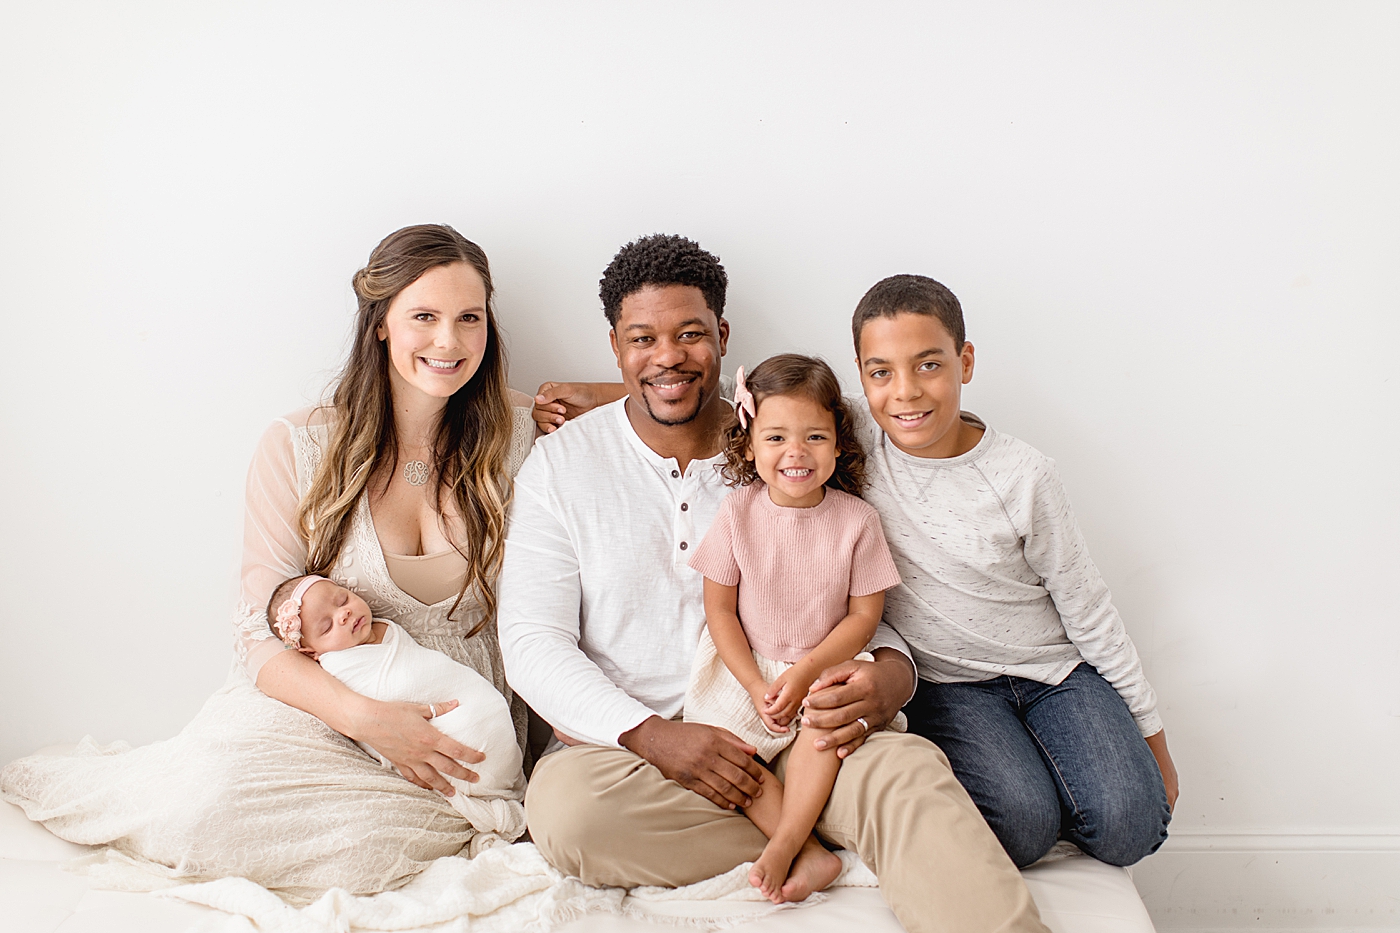 Family portraits during newborn session. Photo by Brittany Elise Photography.